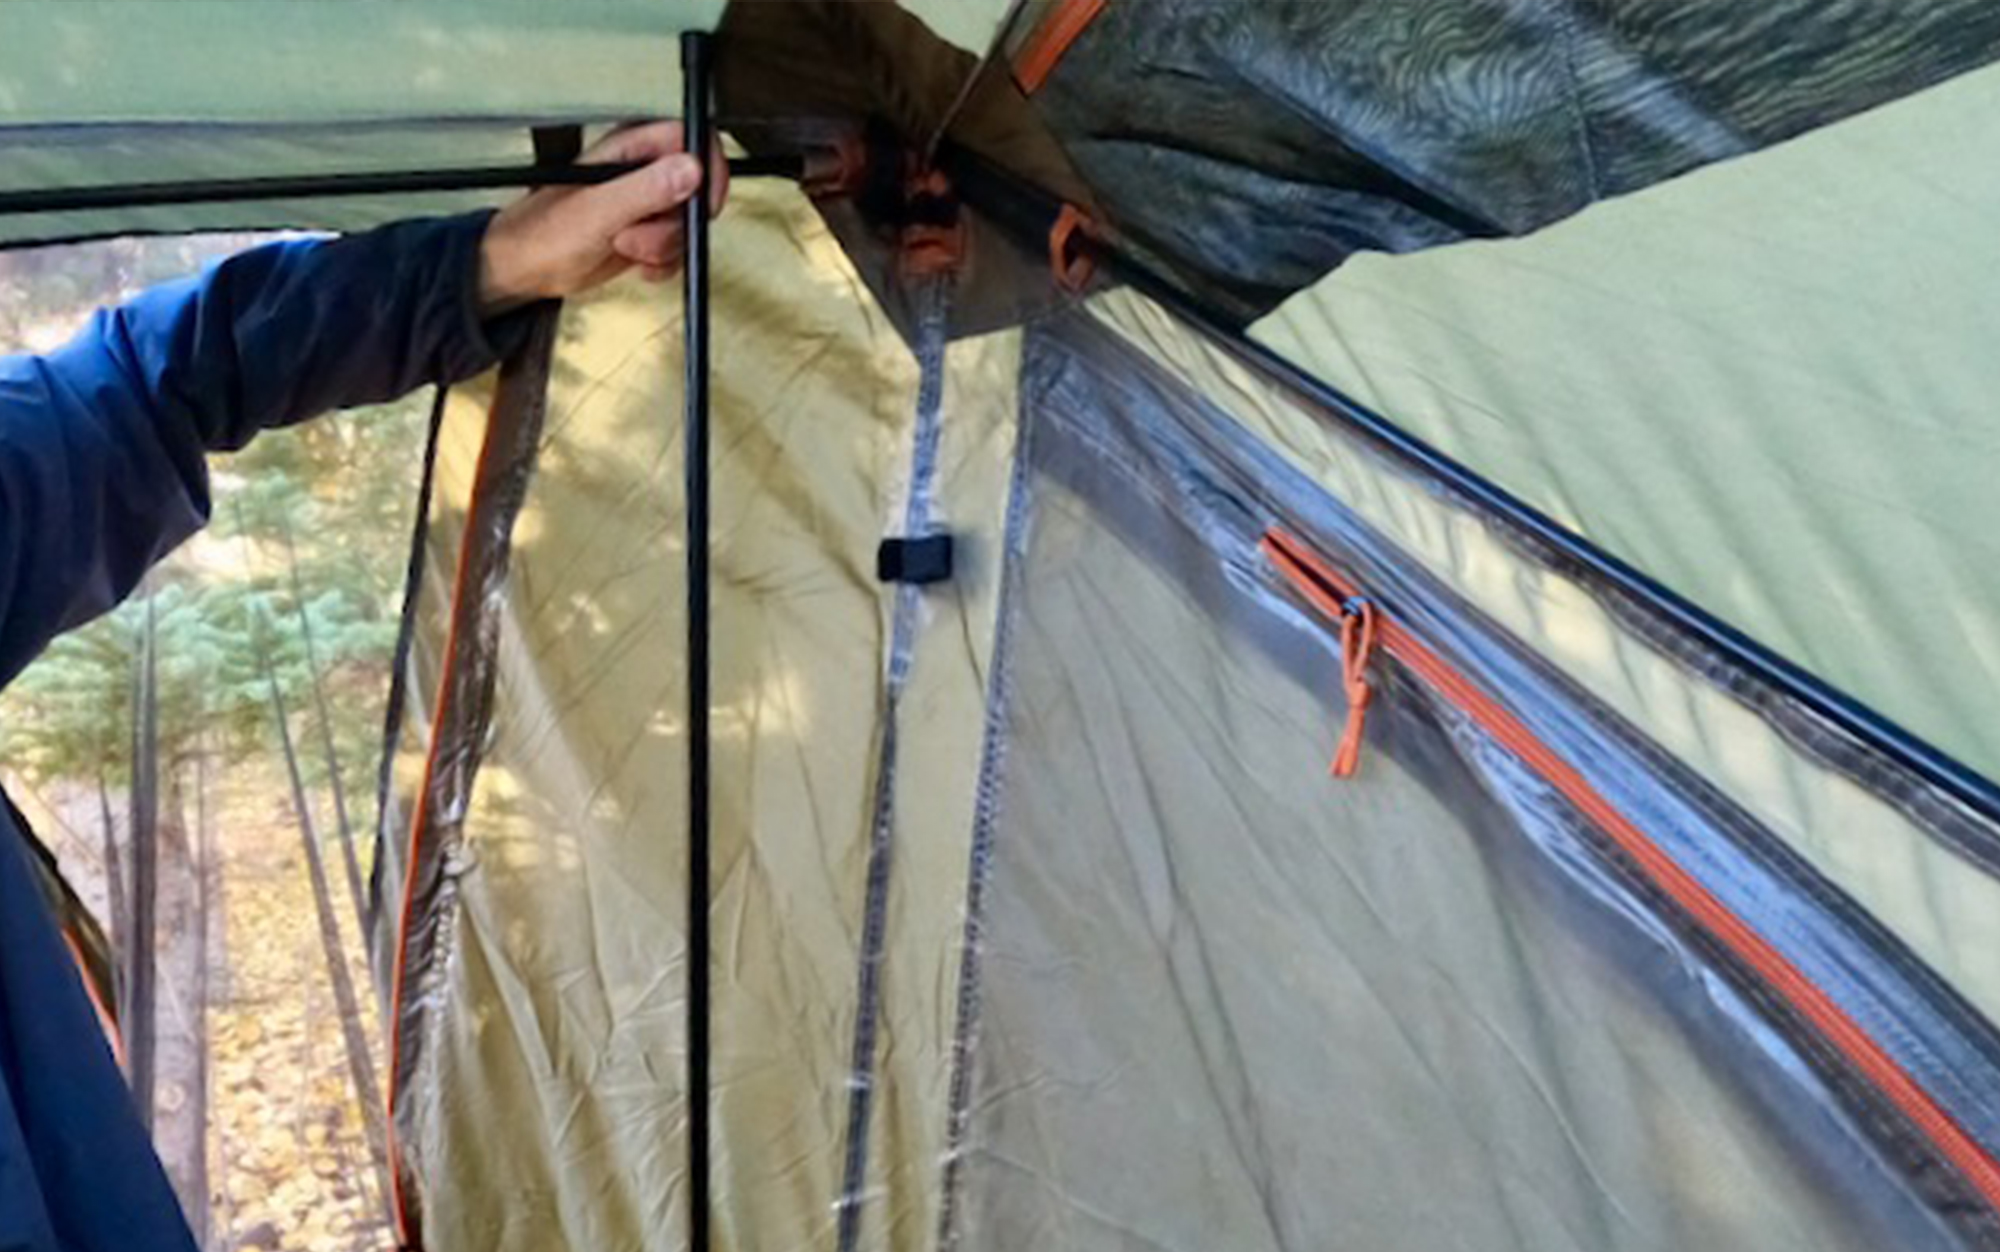 The Bushnell's poles were slightly too long for the tent structure.